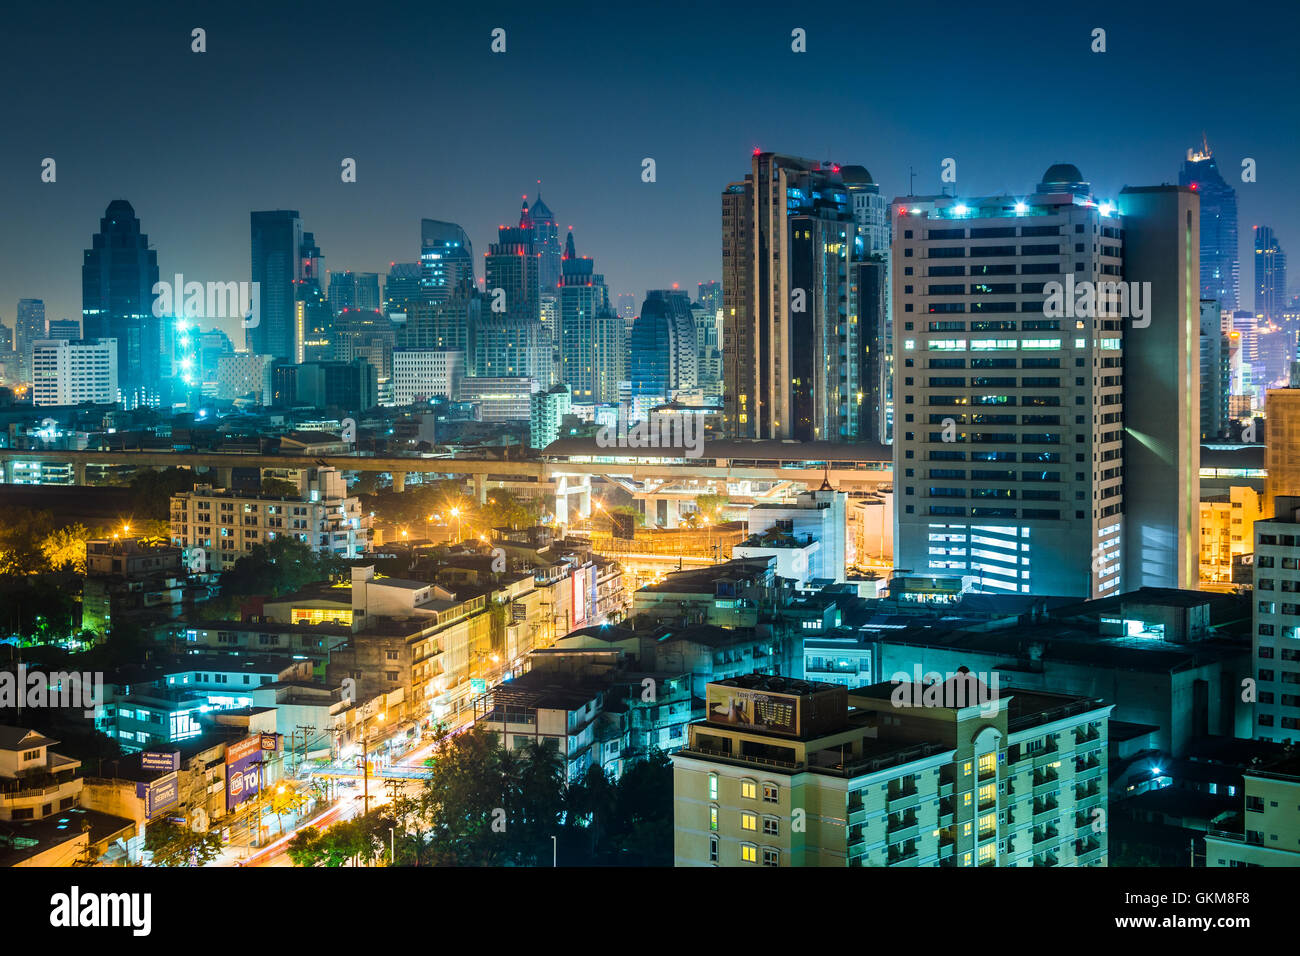 View of skyscrapers at night, in Bangkok, Thailand. Stock Photo